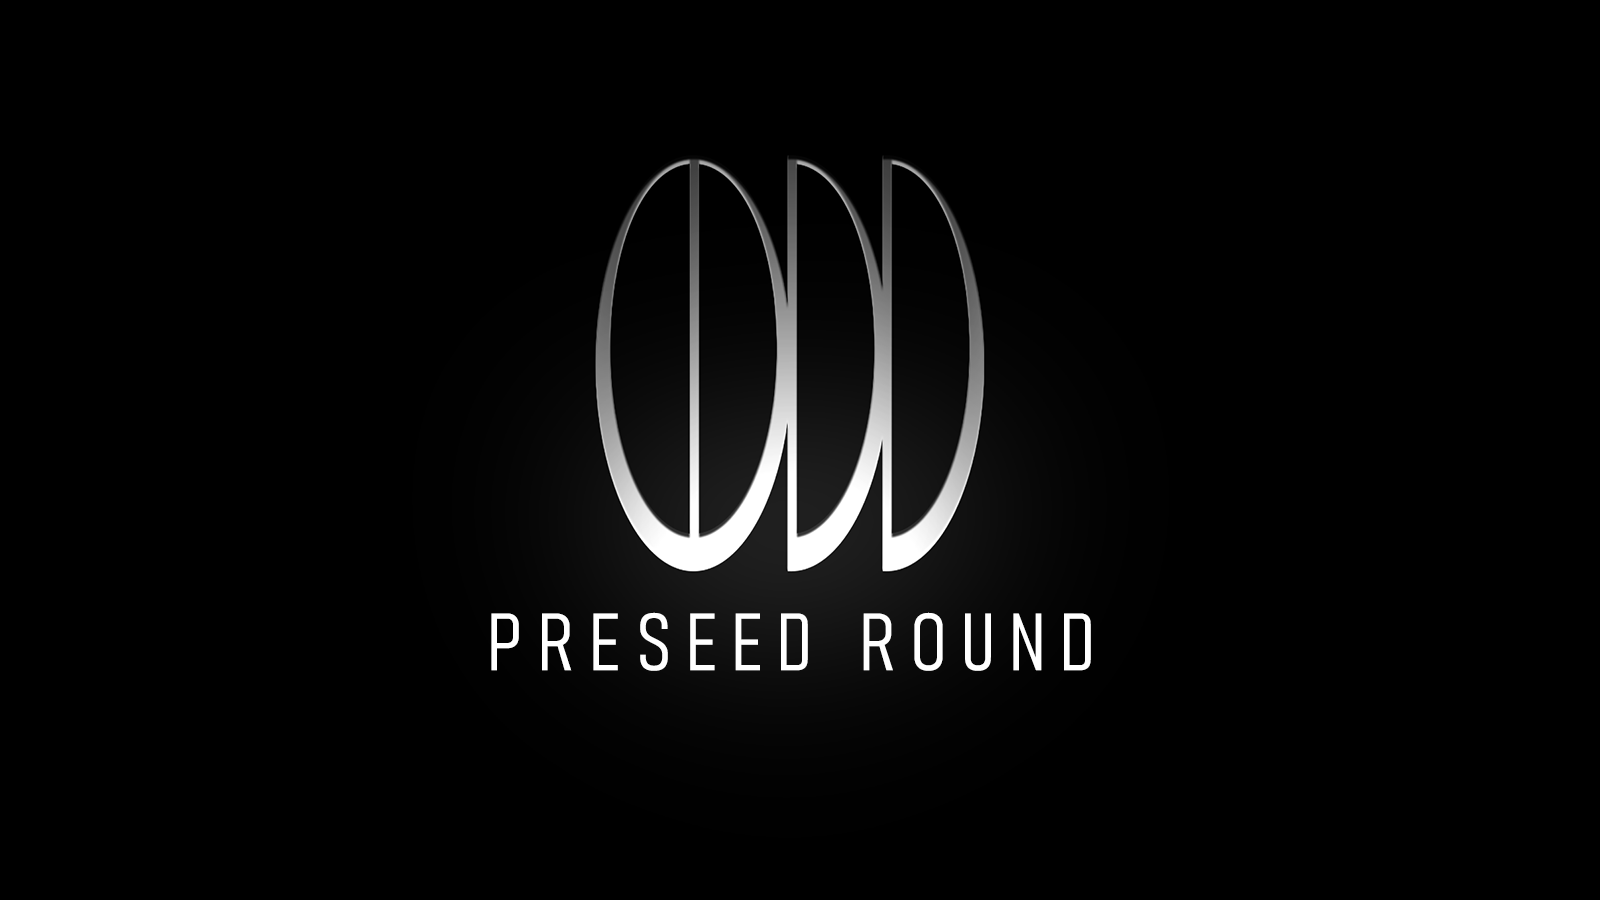 Announcing our £500k pre-seed round